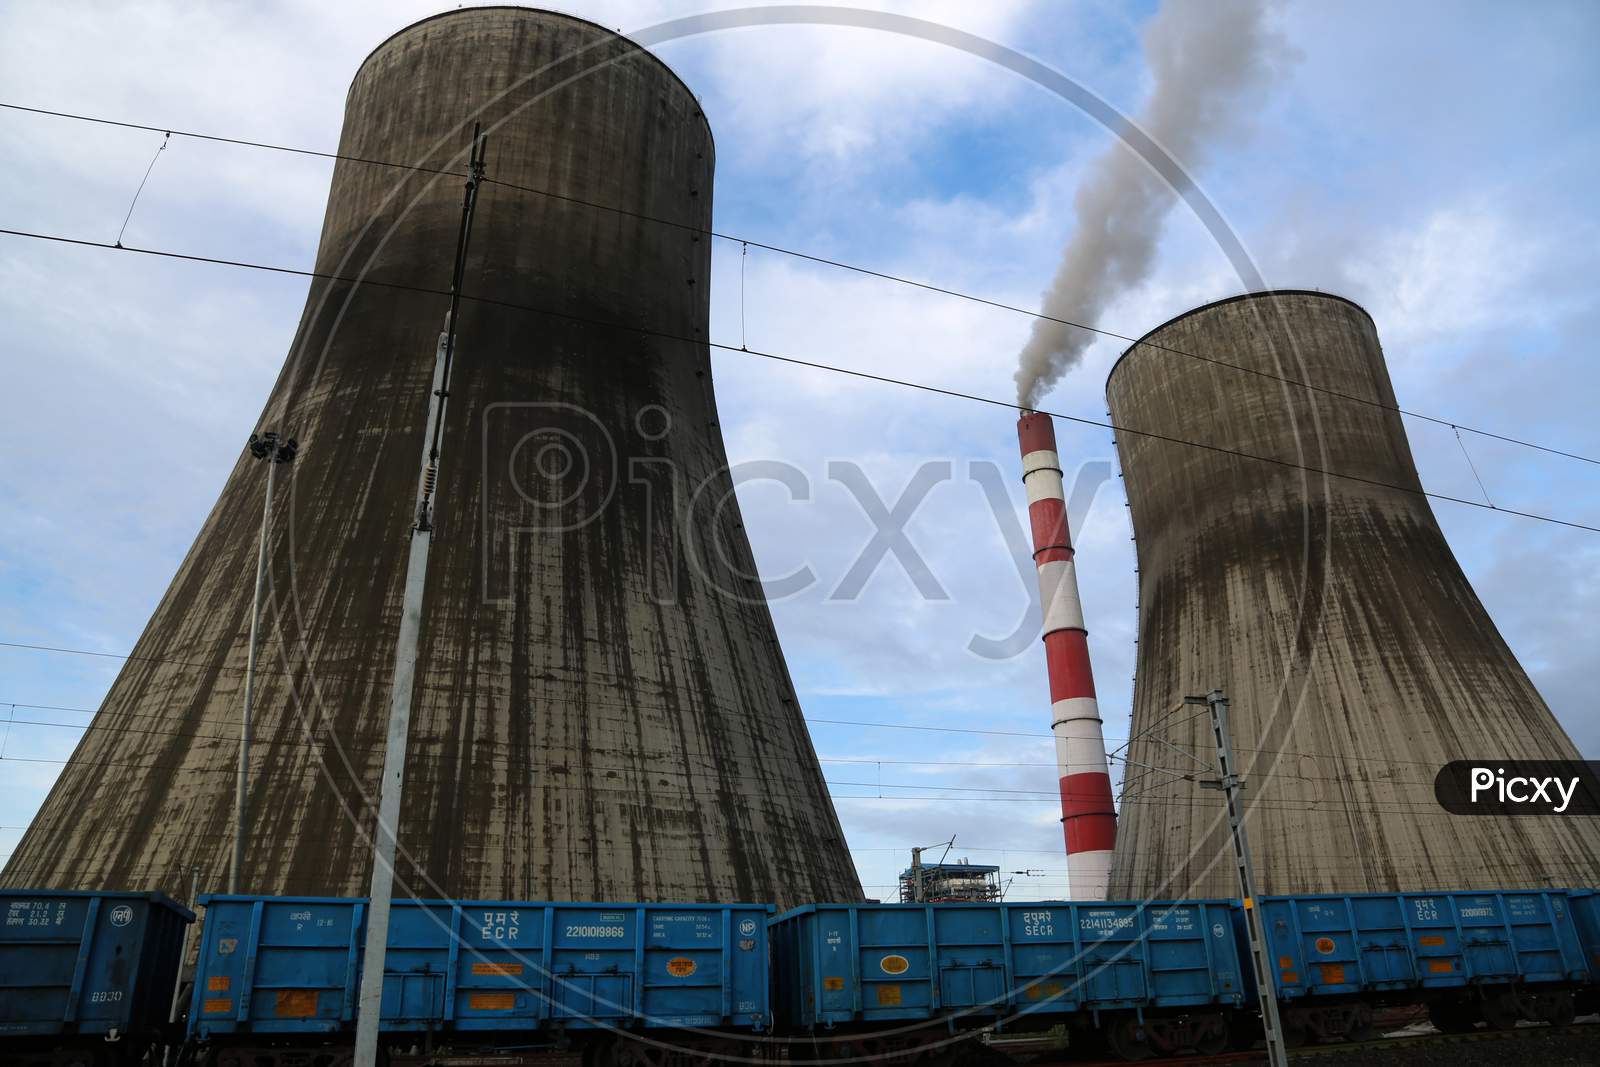 Coal Based Thermal Power Plant